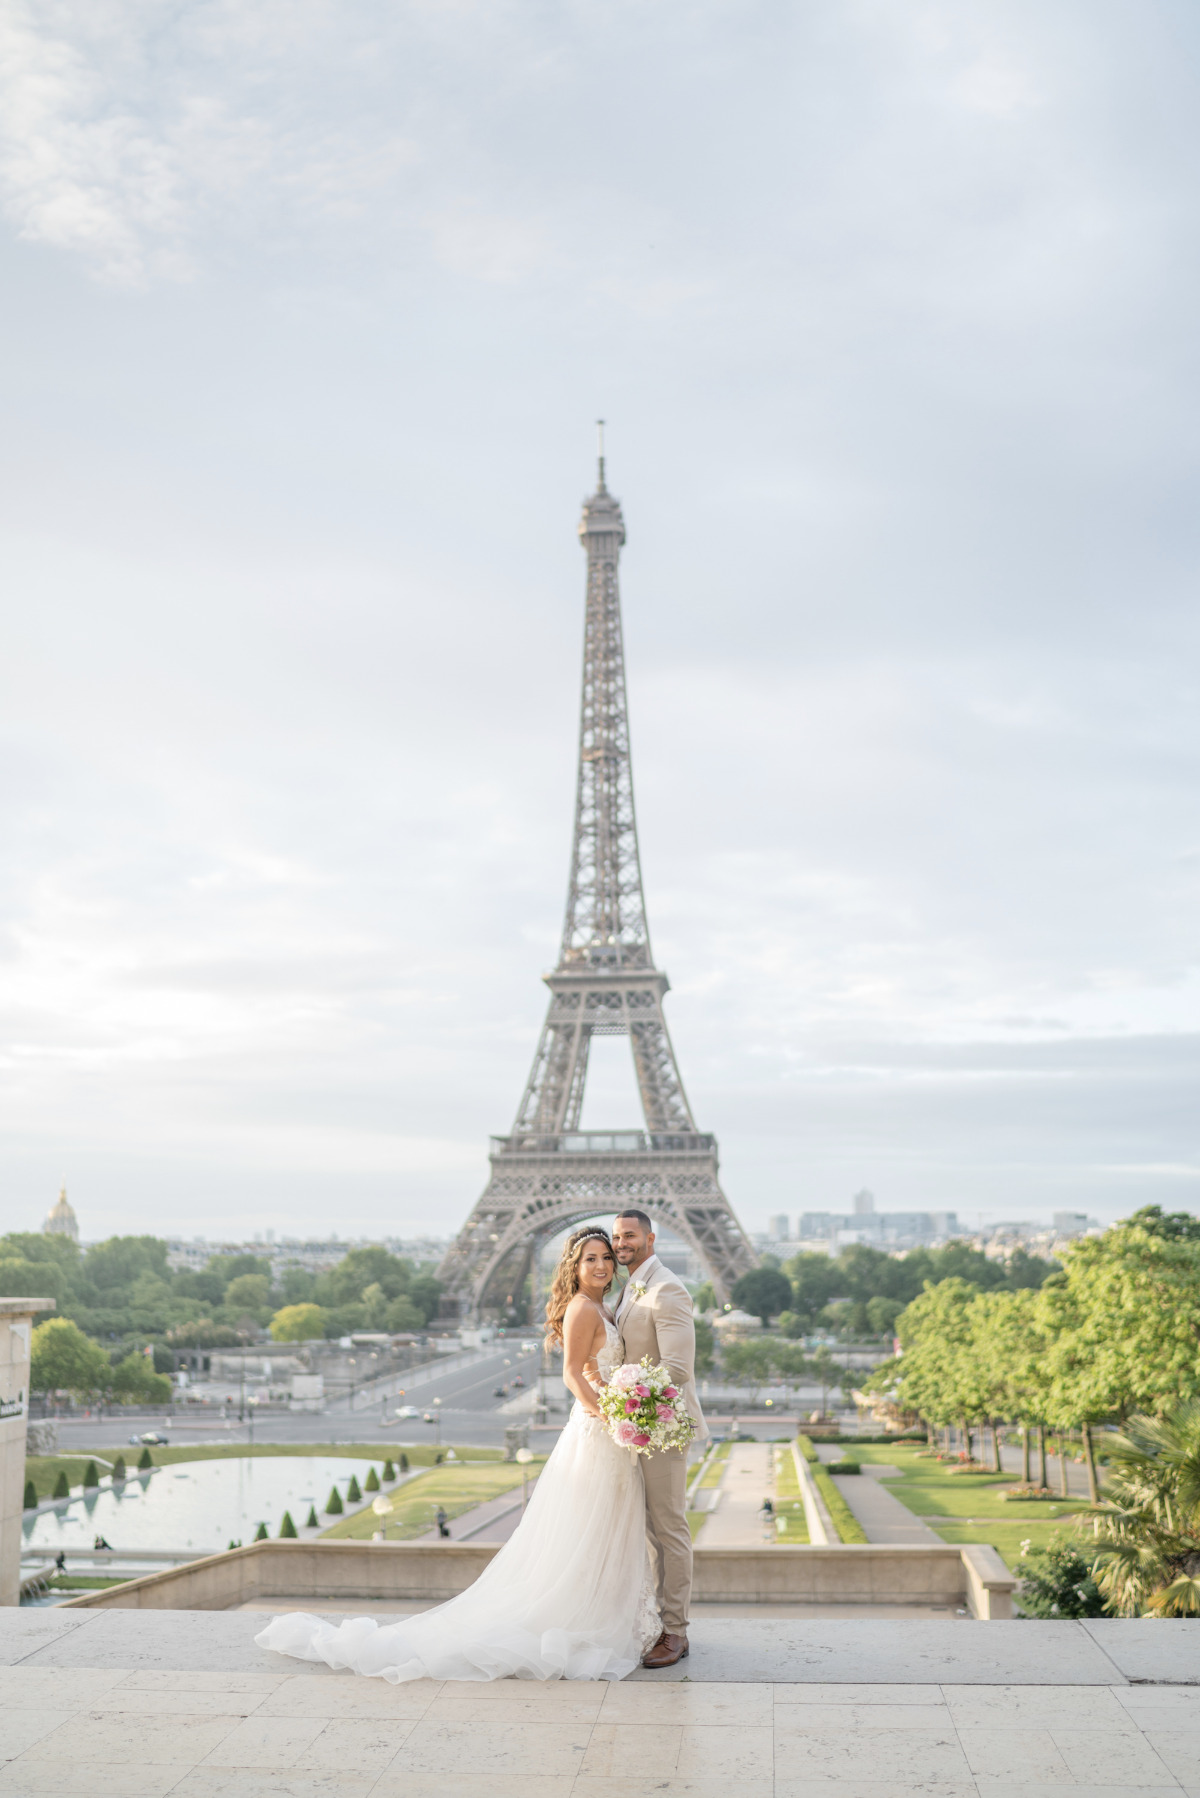 Paris wedding in front of the Eiffel Tower